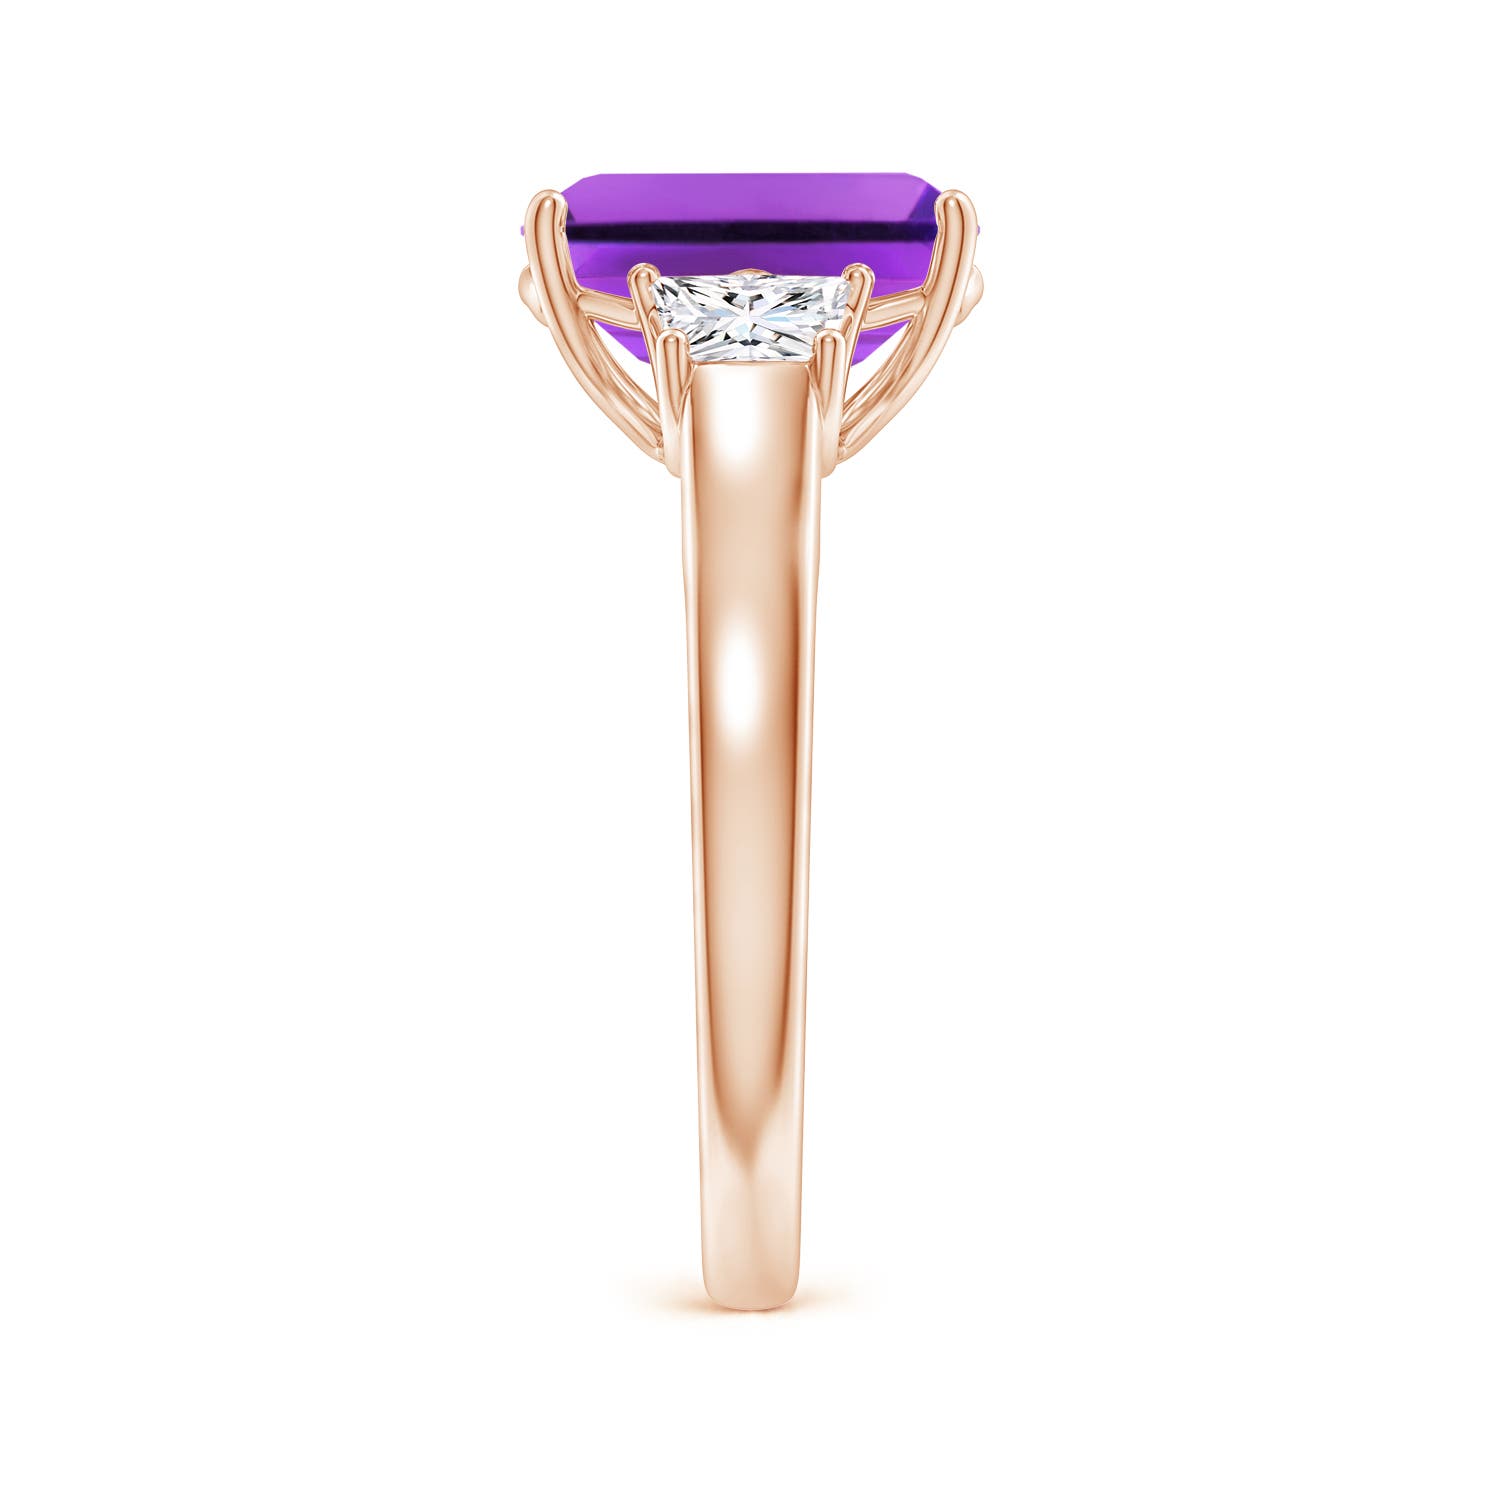 AAA- Amethyst / 3.22 CT / 14 KT Rose Gold